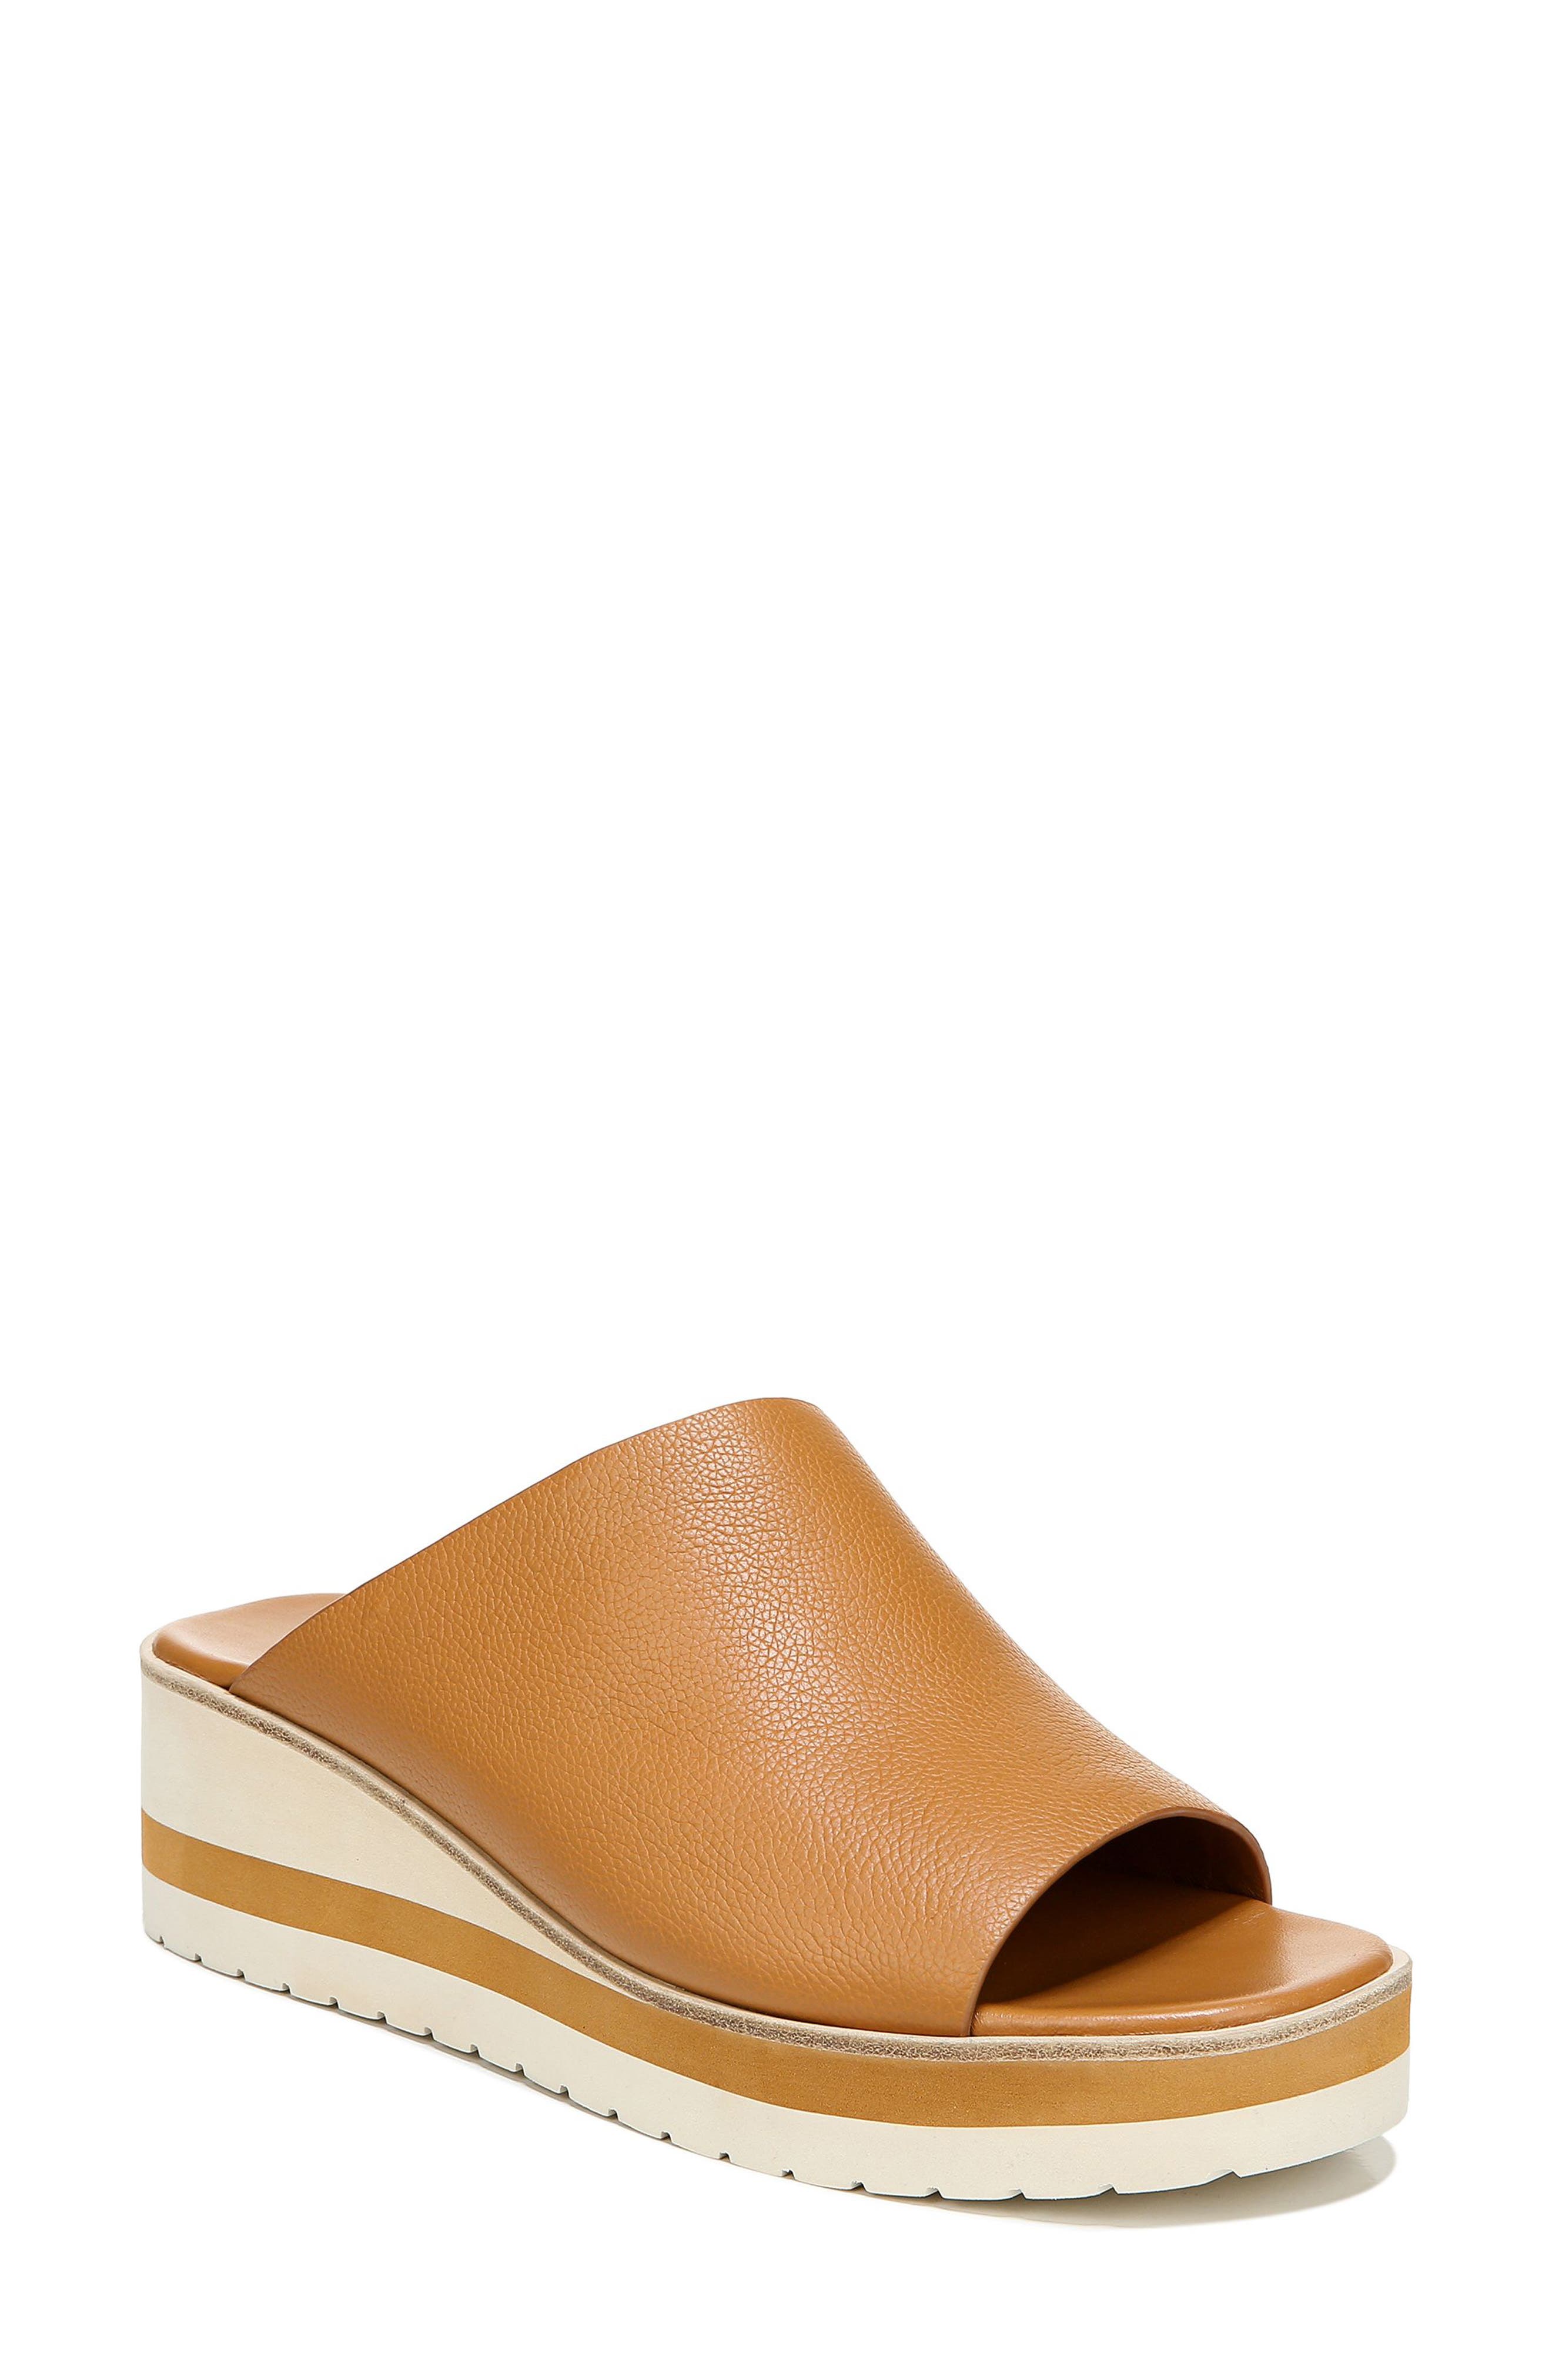 Vince Sarria Leather Wedge Sandal In Tan